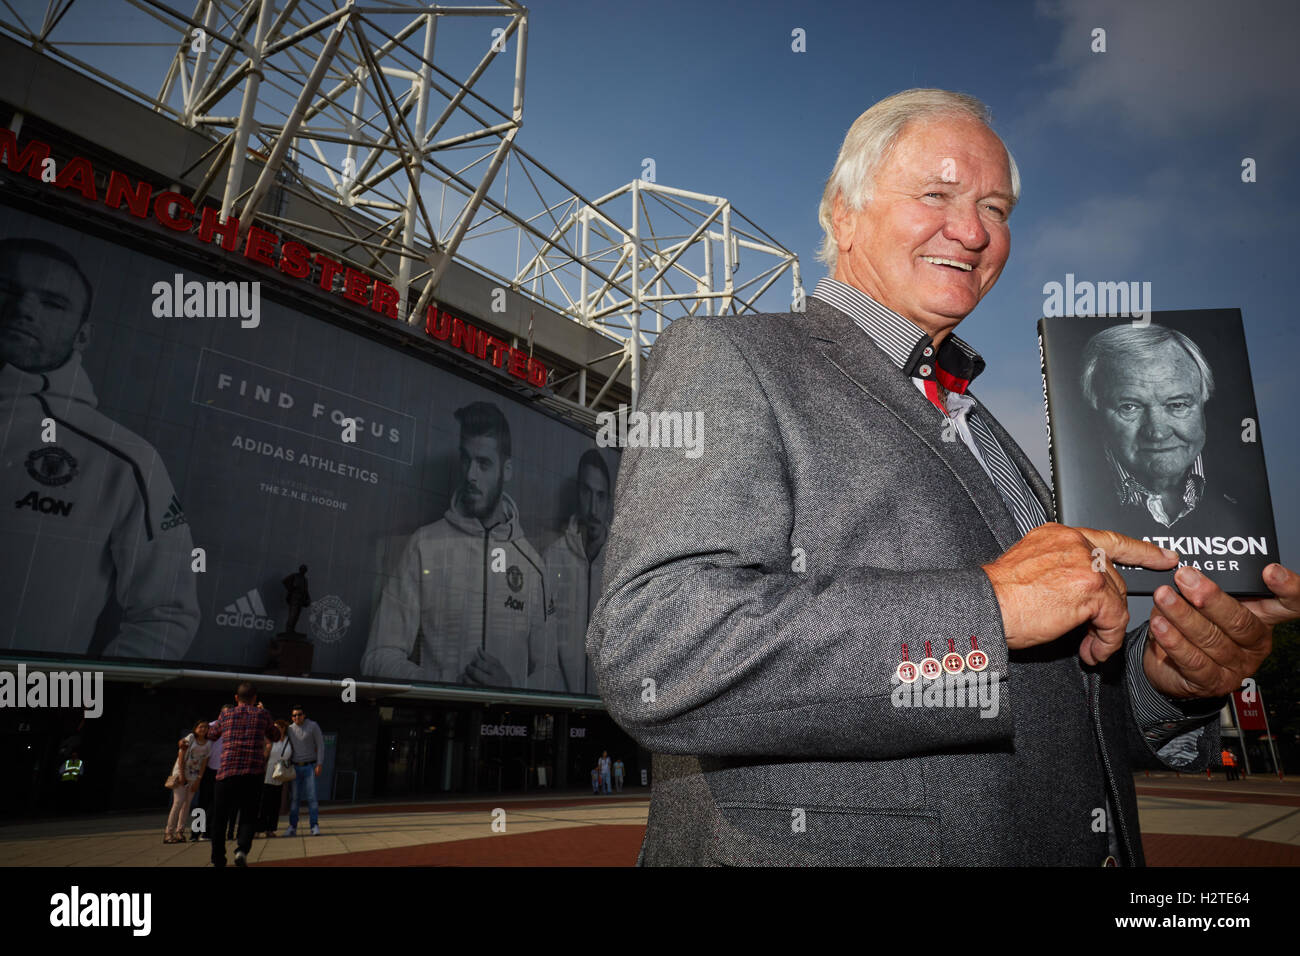 Ronald Ron Atkinson Old Trafford Manchester   Celebrity famous famed public figure star notoriety performance performing perform Stock Photo